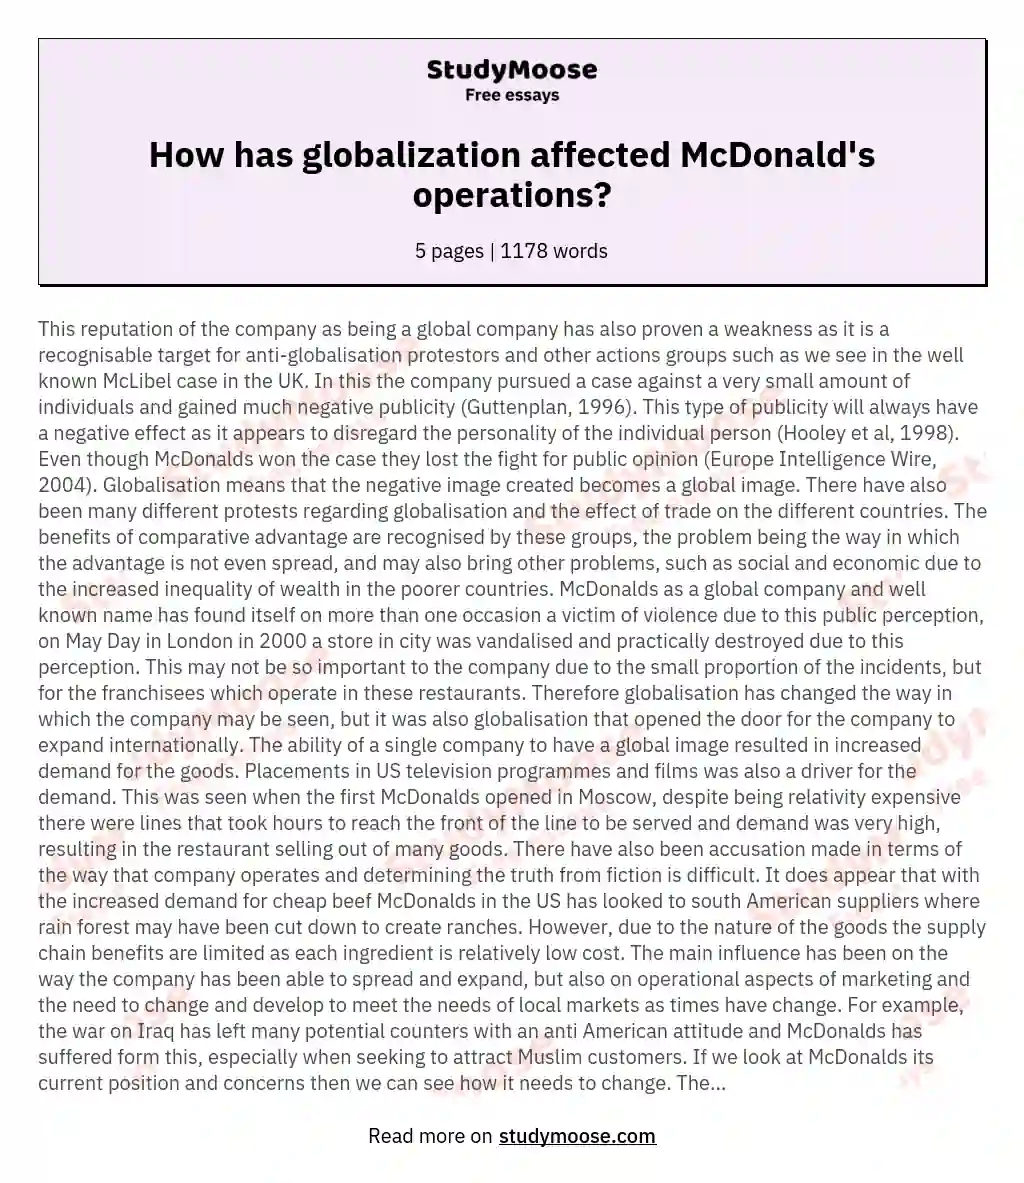 How has globalization affected McDonald's operations? essay